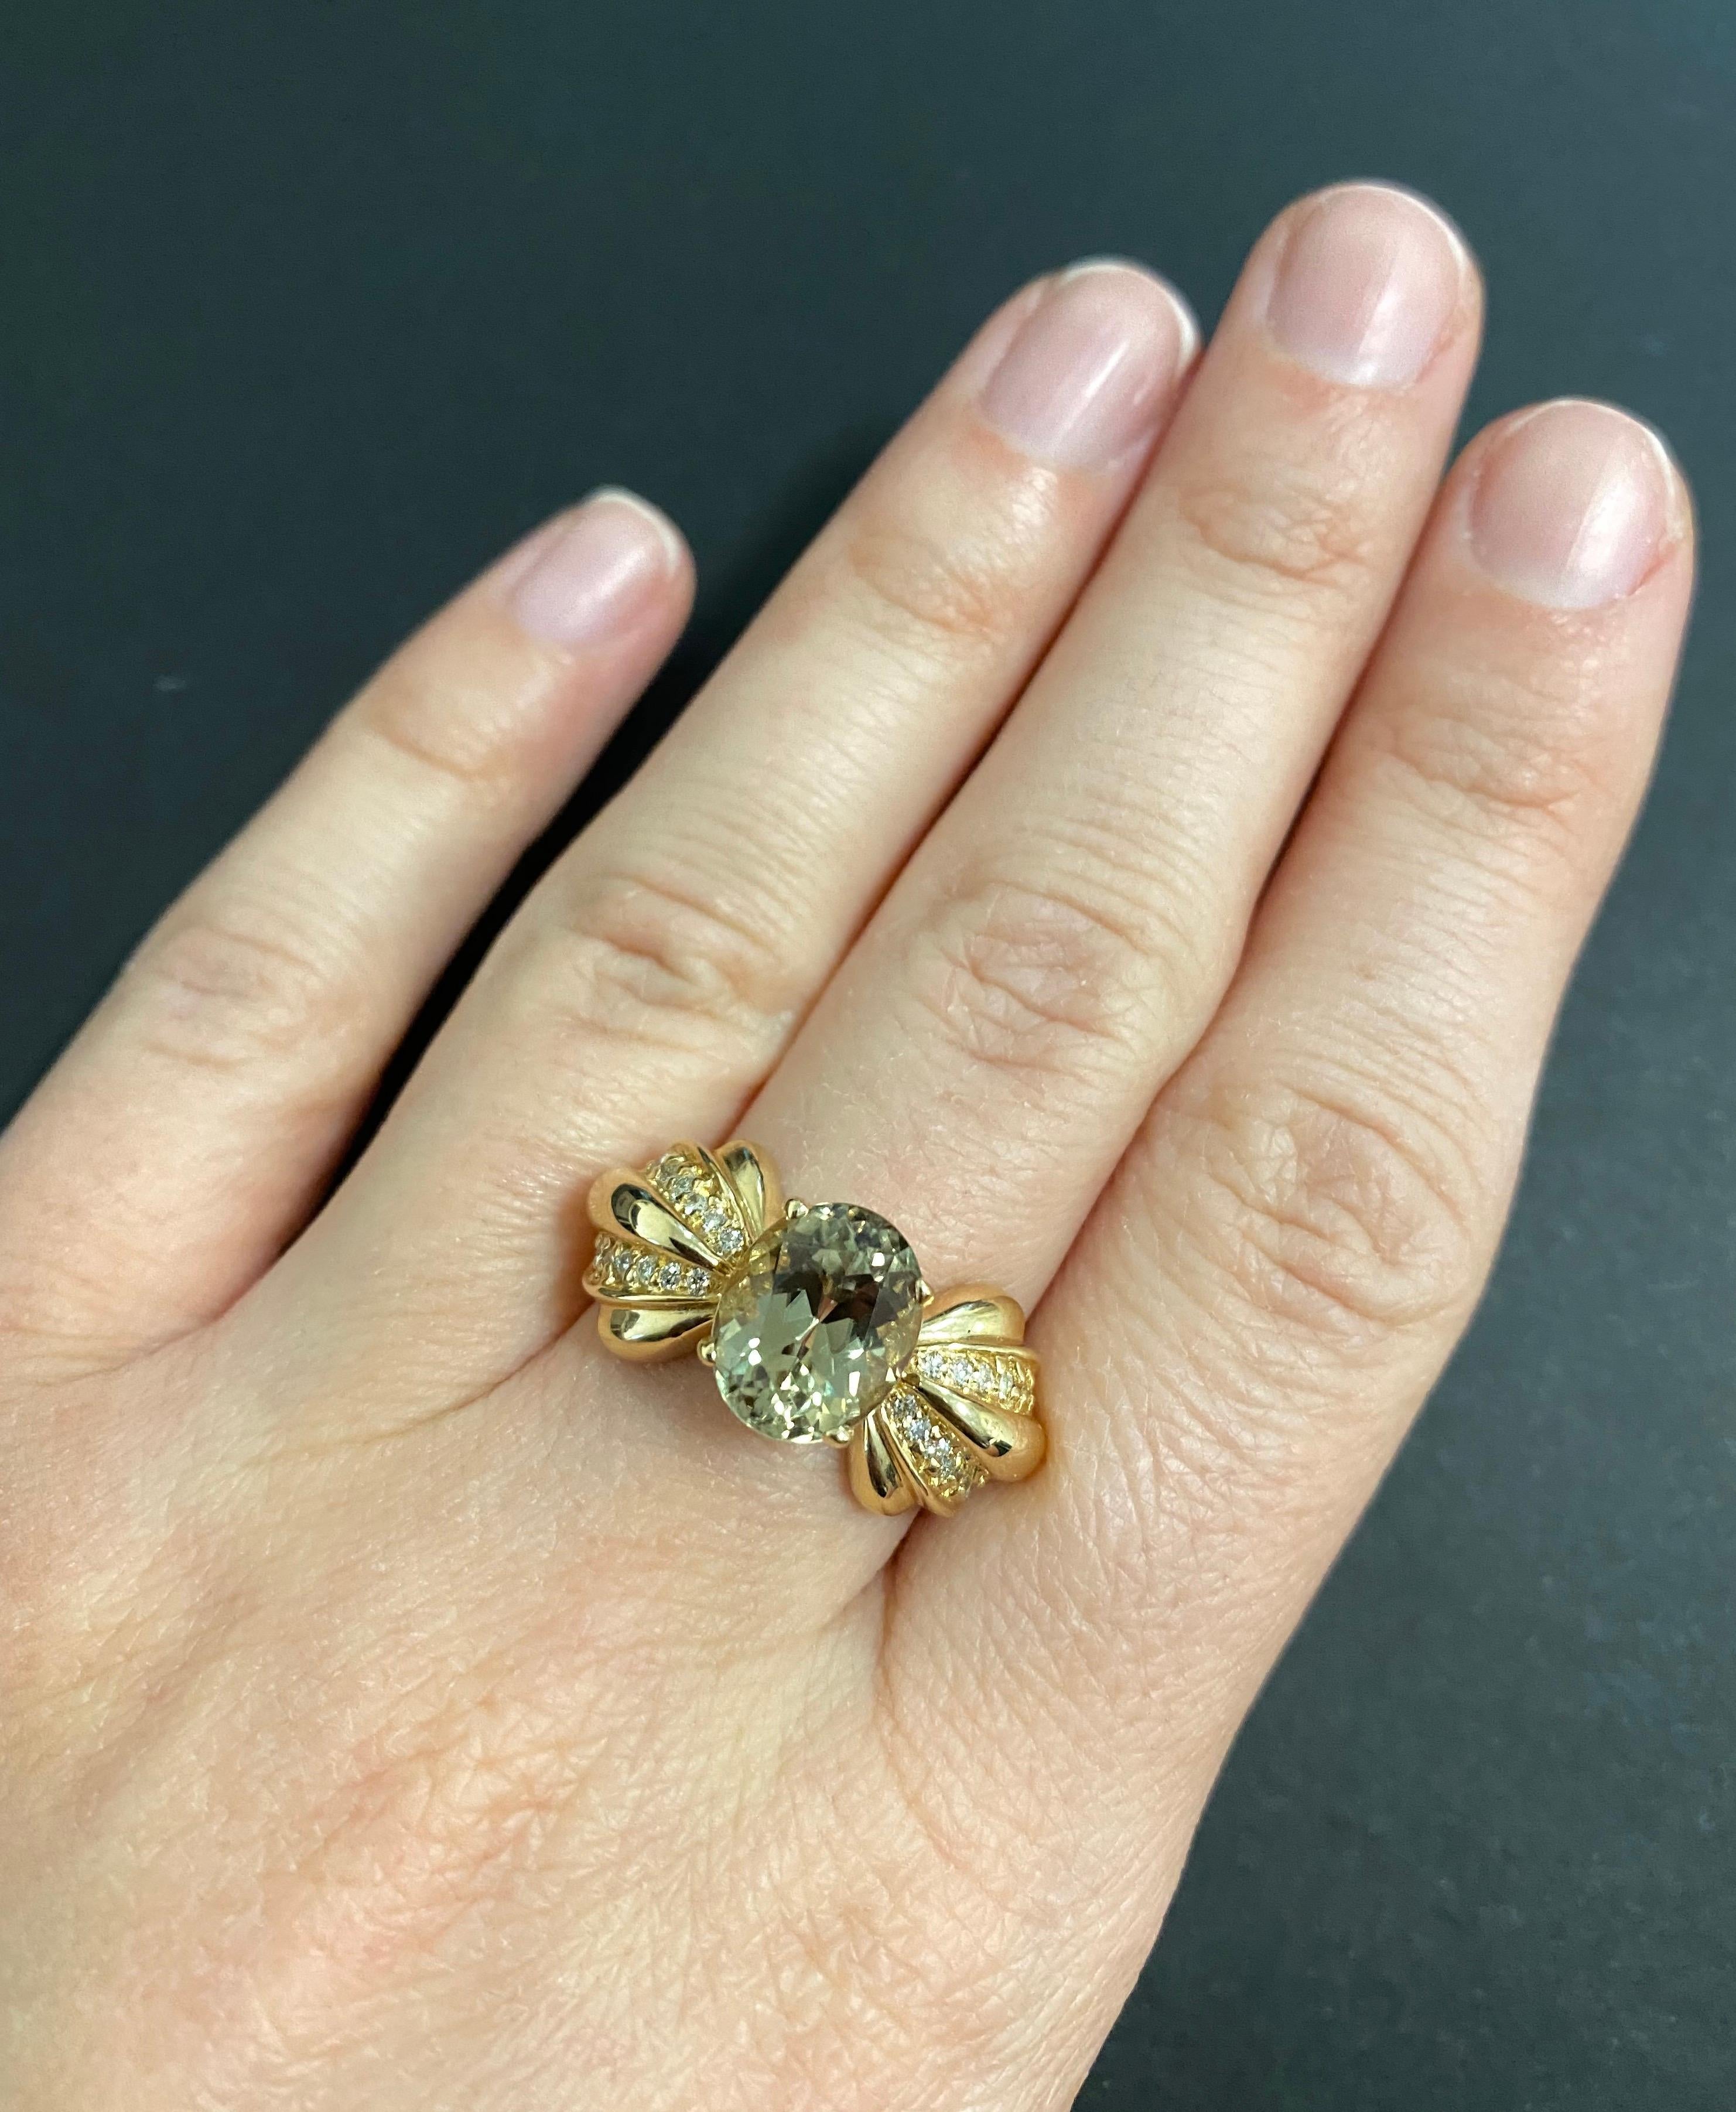 This new gemstone was discovered and mined in Turkey’s Anatolian Mountains. Under natural light, it appears green with flashes of yellow, and under incandescent lighting, the color shifts to a champagne color. This is due to natural minerals inside